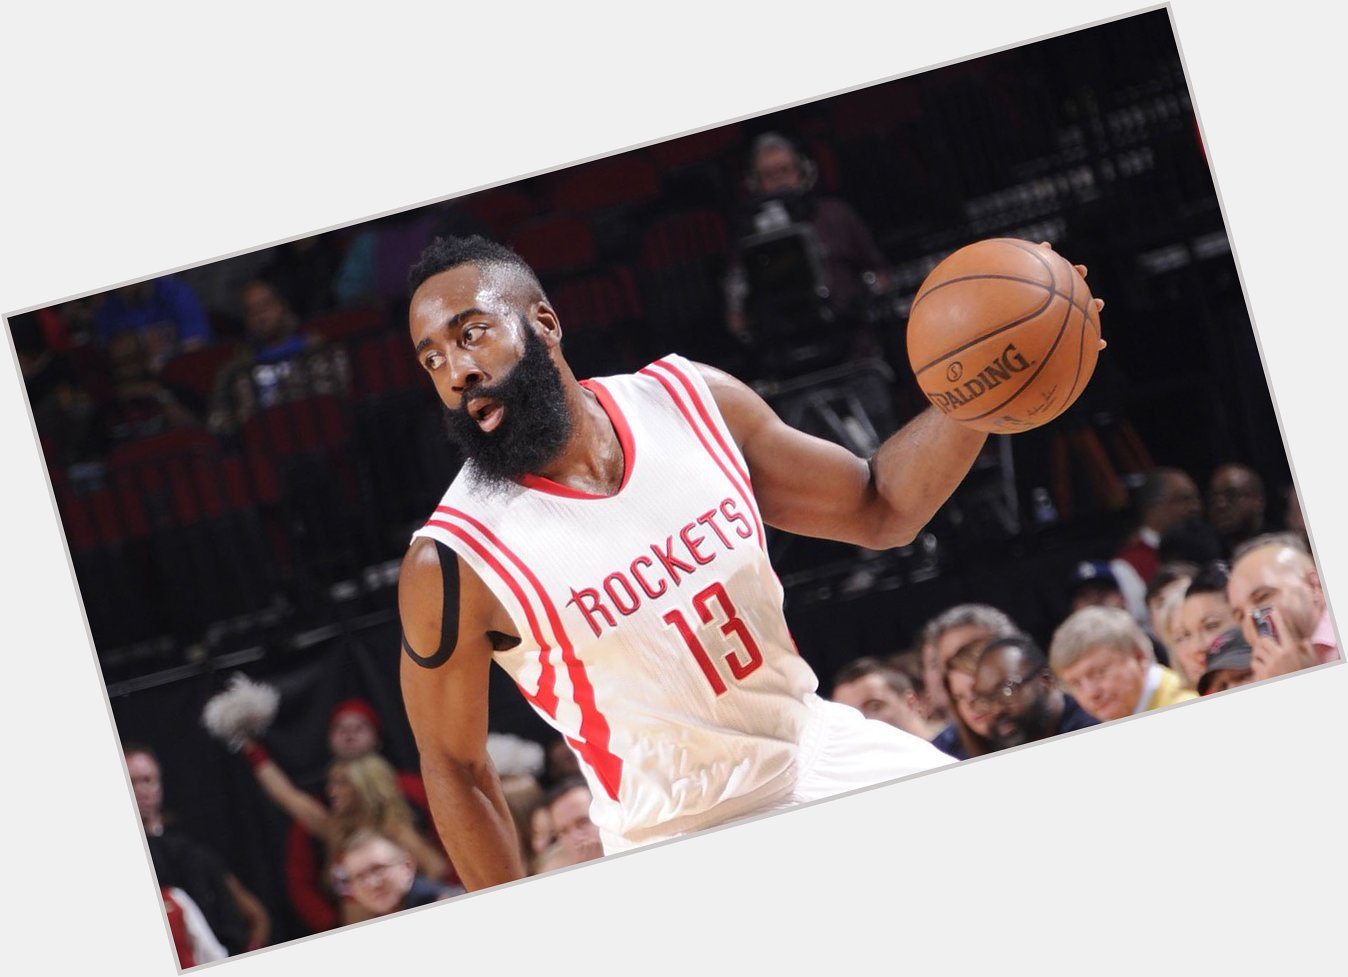 Happy Birthday to James Harden who turns 28 today 